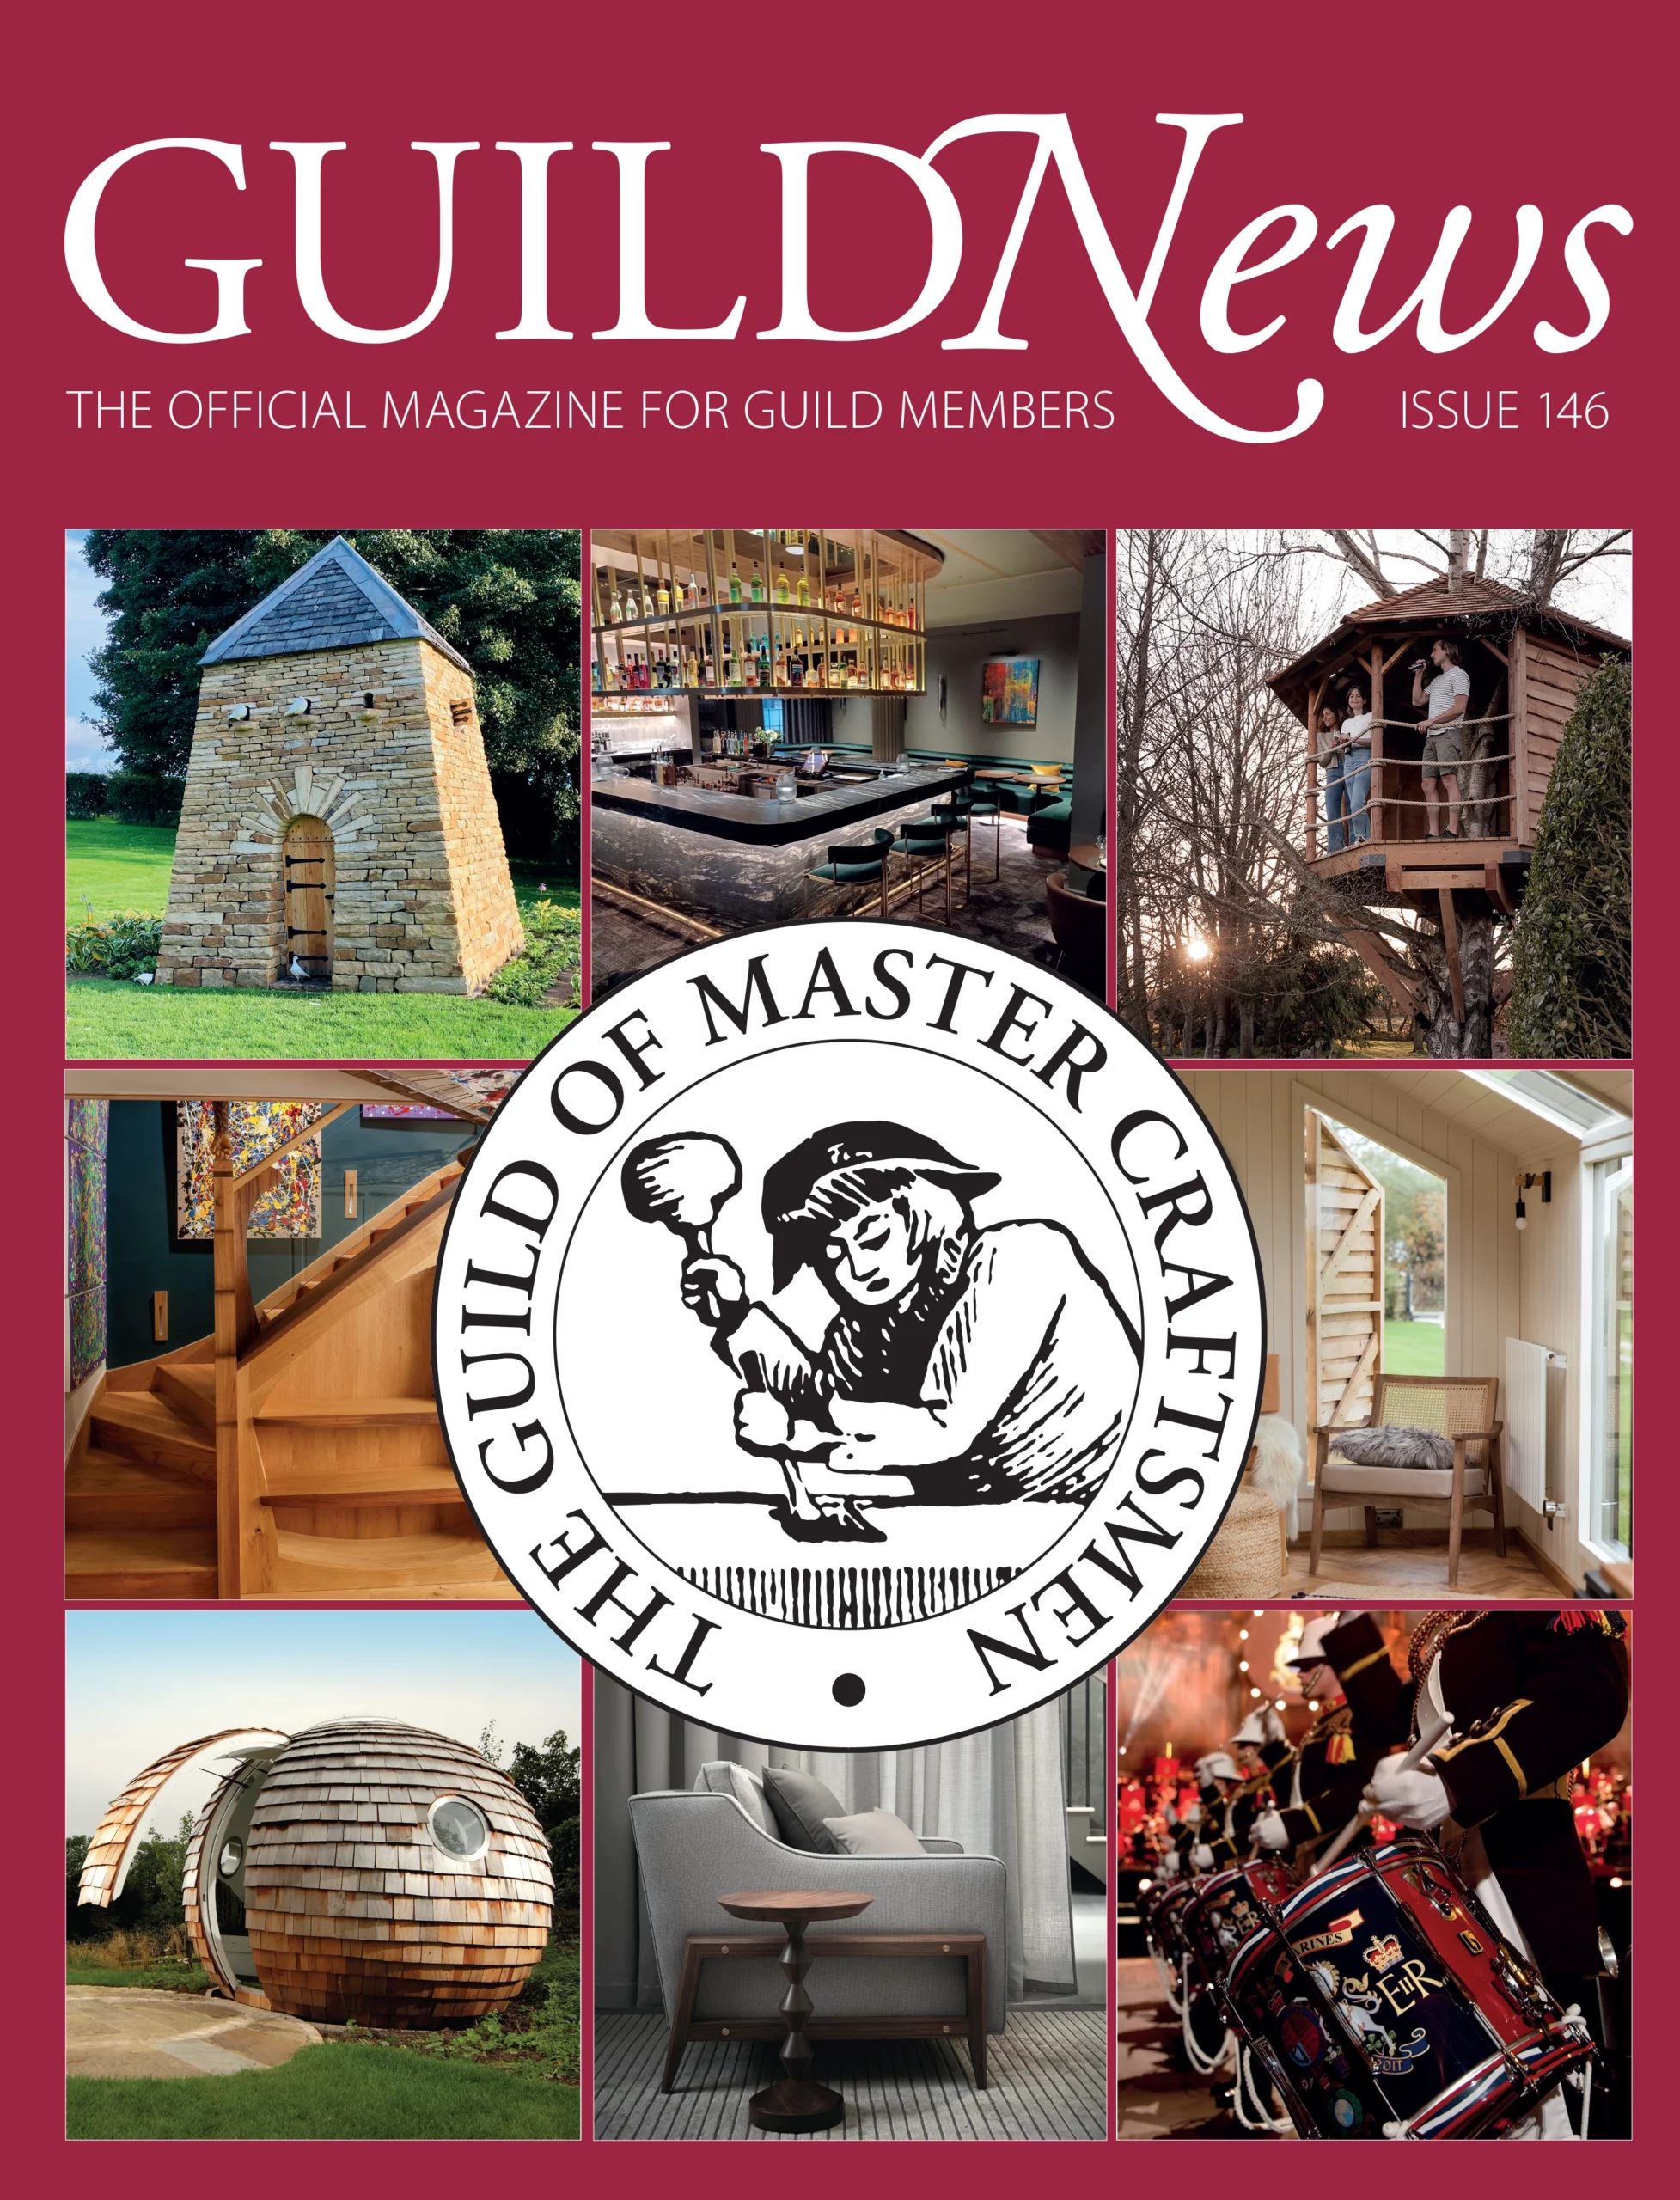 Guild News Issue 146, featuring a plethora of different crafts people